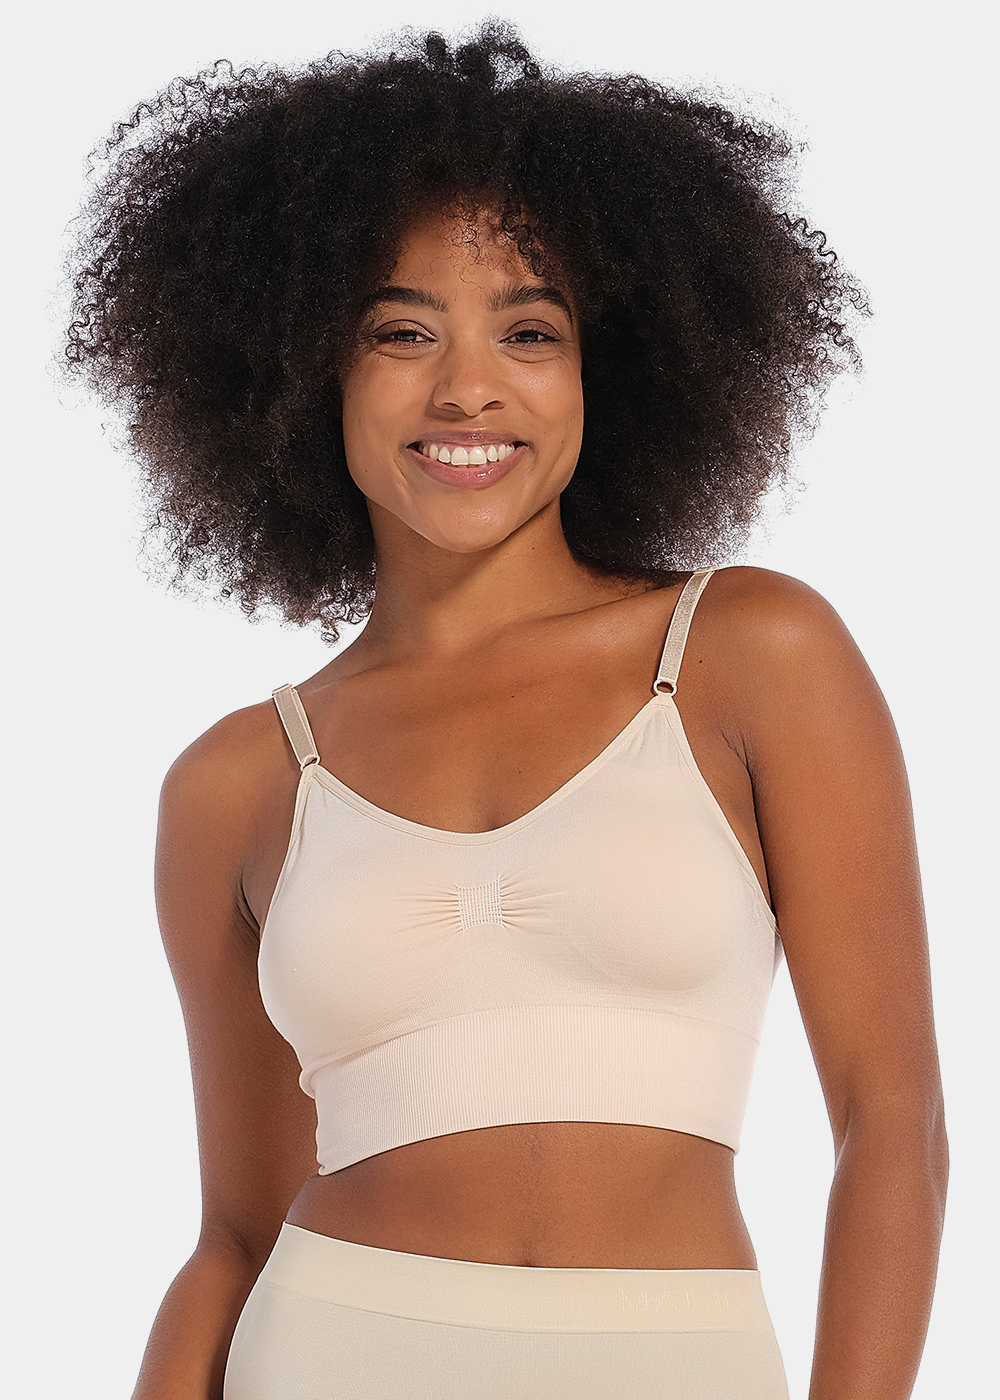 Cotton On iBody Stretch-Organic Cotton Padded Low-Back Bralette 6336257-03